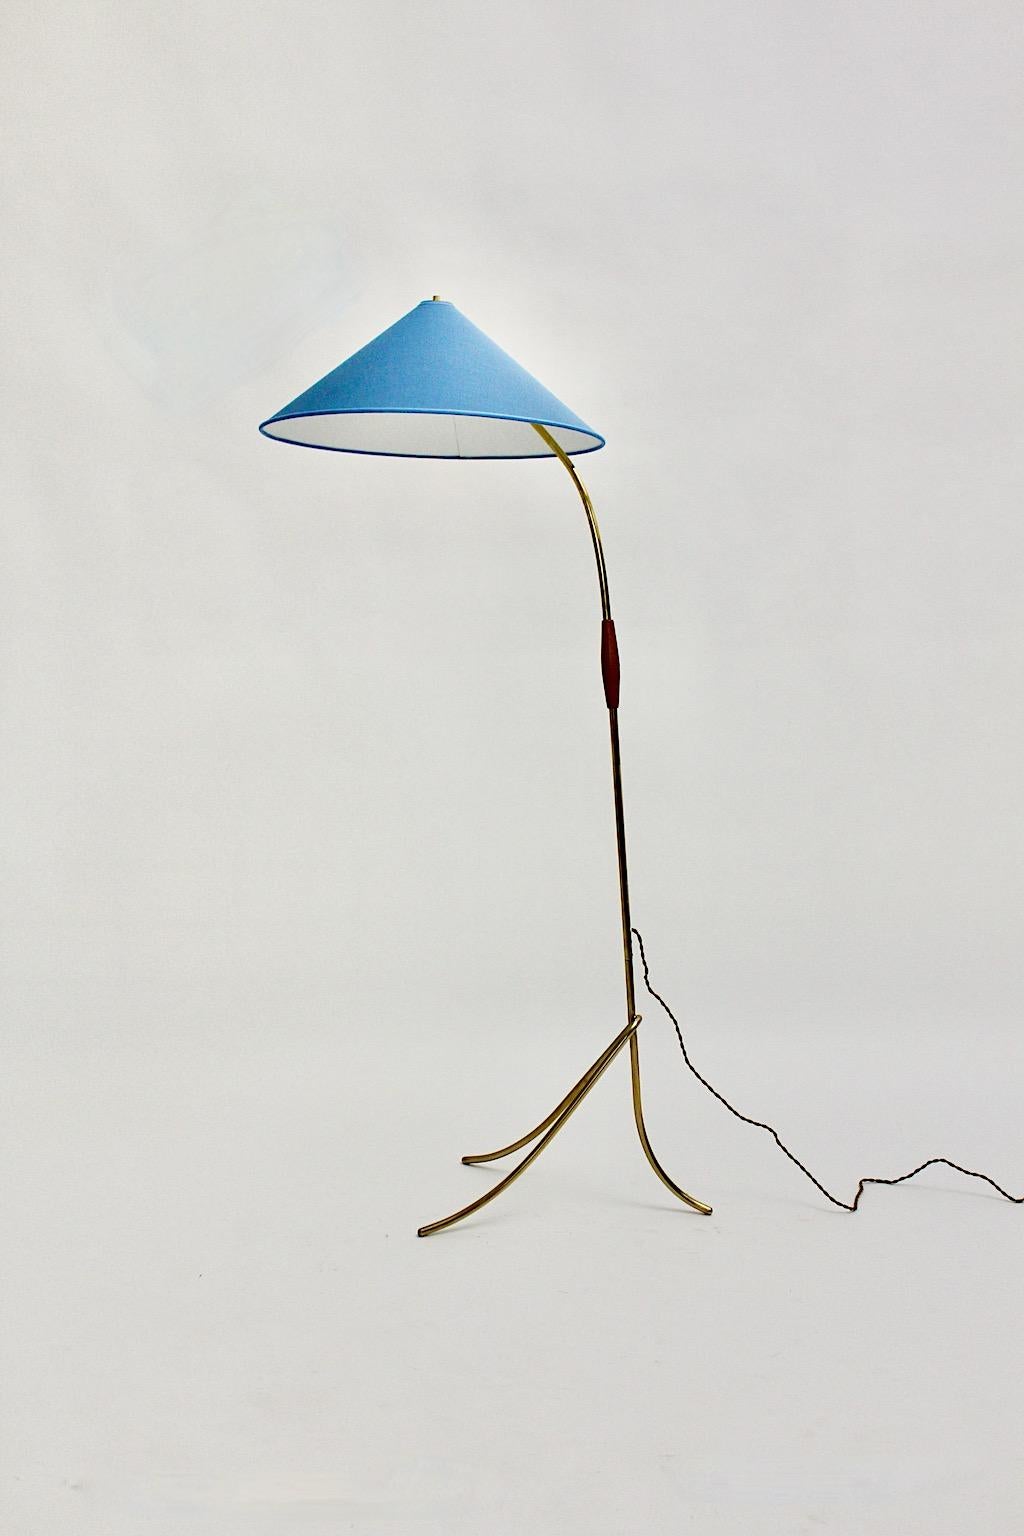 Brass blue Mid-Century Modern vintage floor lamp designed and manufactured by Rupert Nikoll, 1950s, Austria.
The company Rupert Nikoll was a renowned lamp manufacturer during the midcentury era in Vienna.
The stem was made of brass tube with a